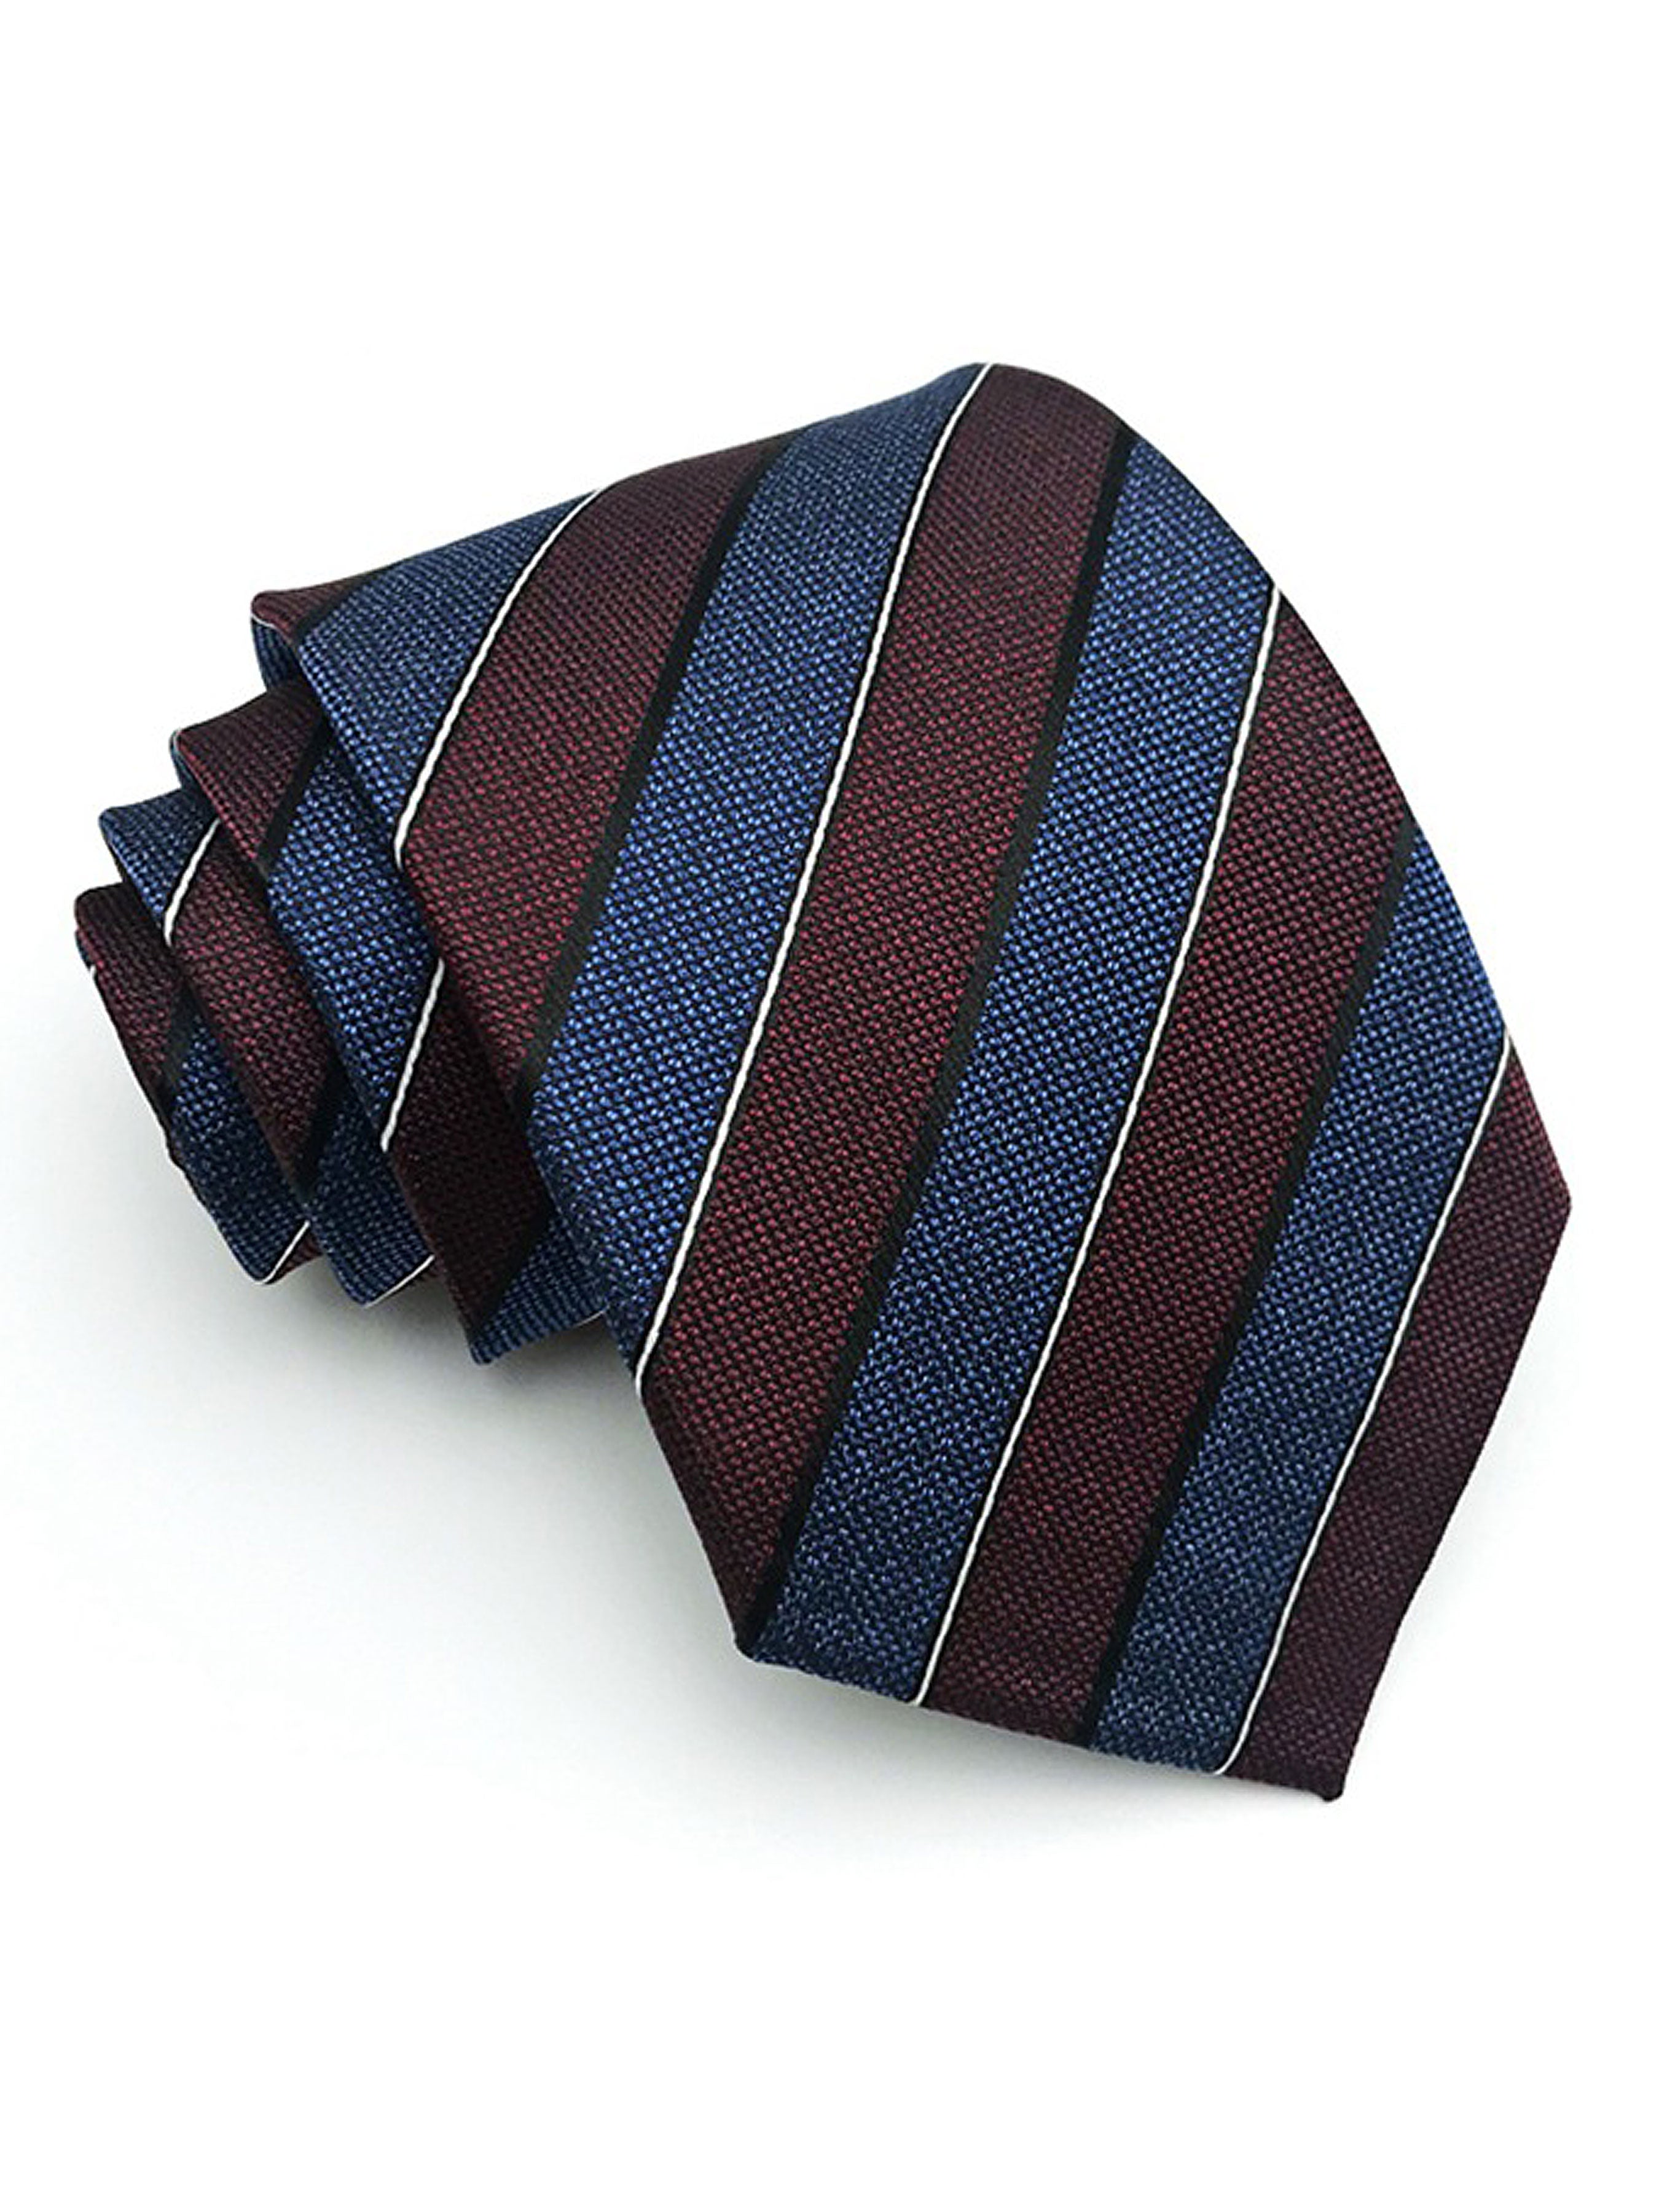 Awning Stripe Tie - Navy Blue with Maroon Line - Zeve Shoes